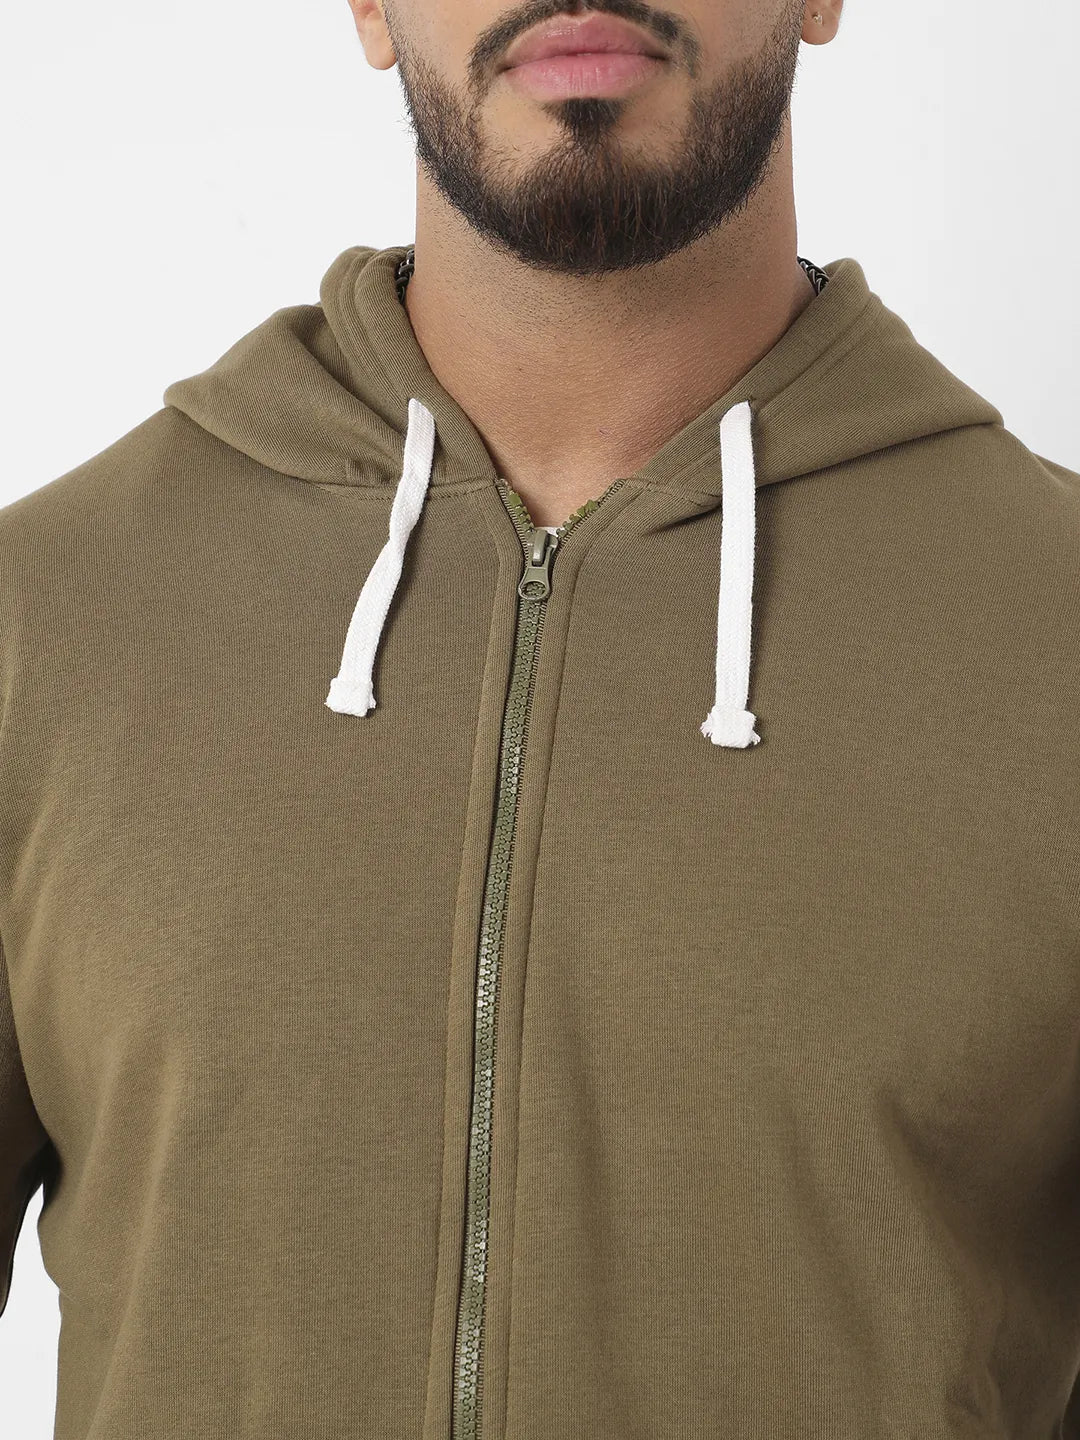 Olive Green Zip-Front Hoodie With Contrast Drawstring